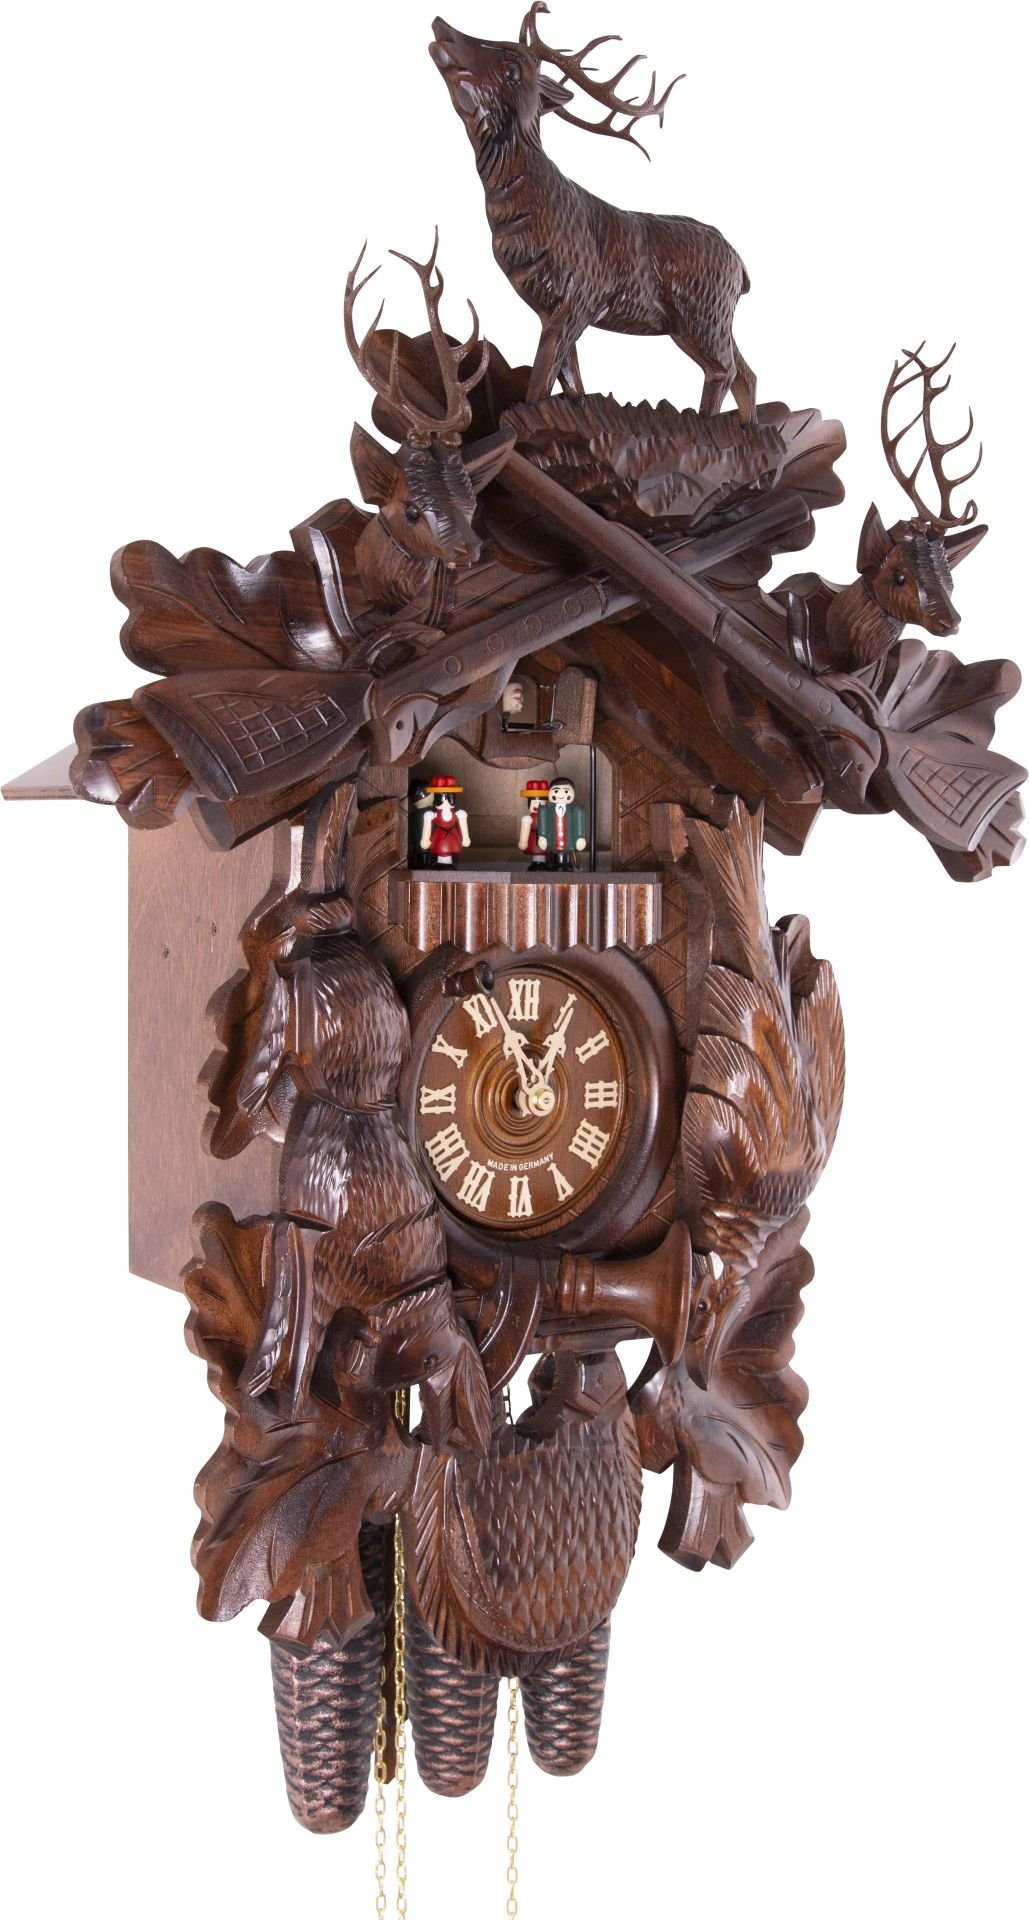 Cuckoo Clock Carved Style 8 Day Movement 60cm by Hekas